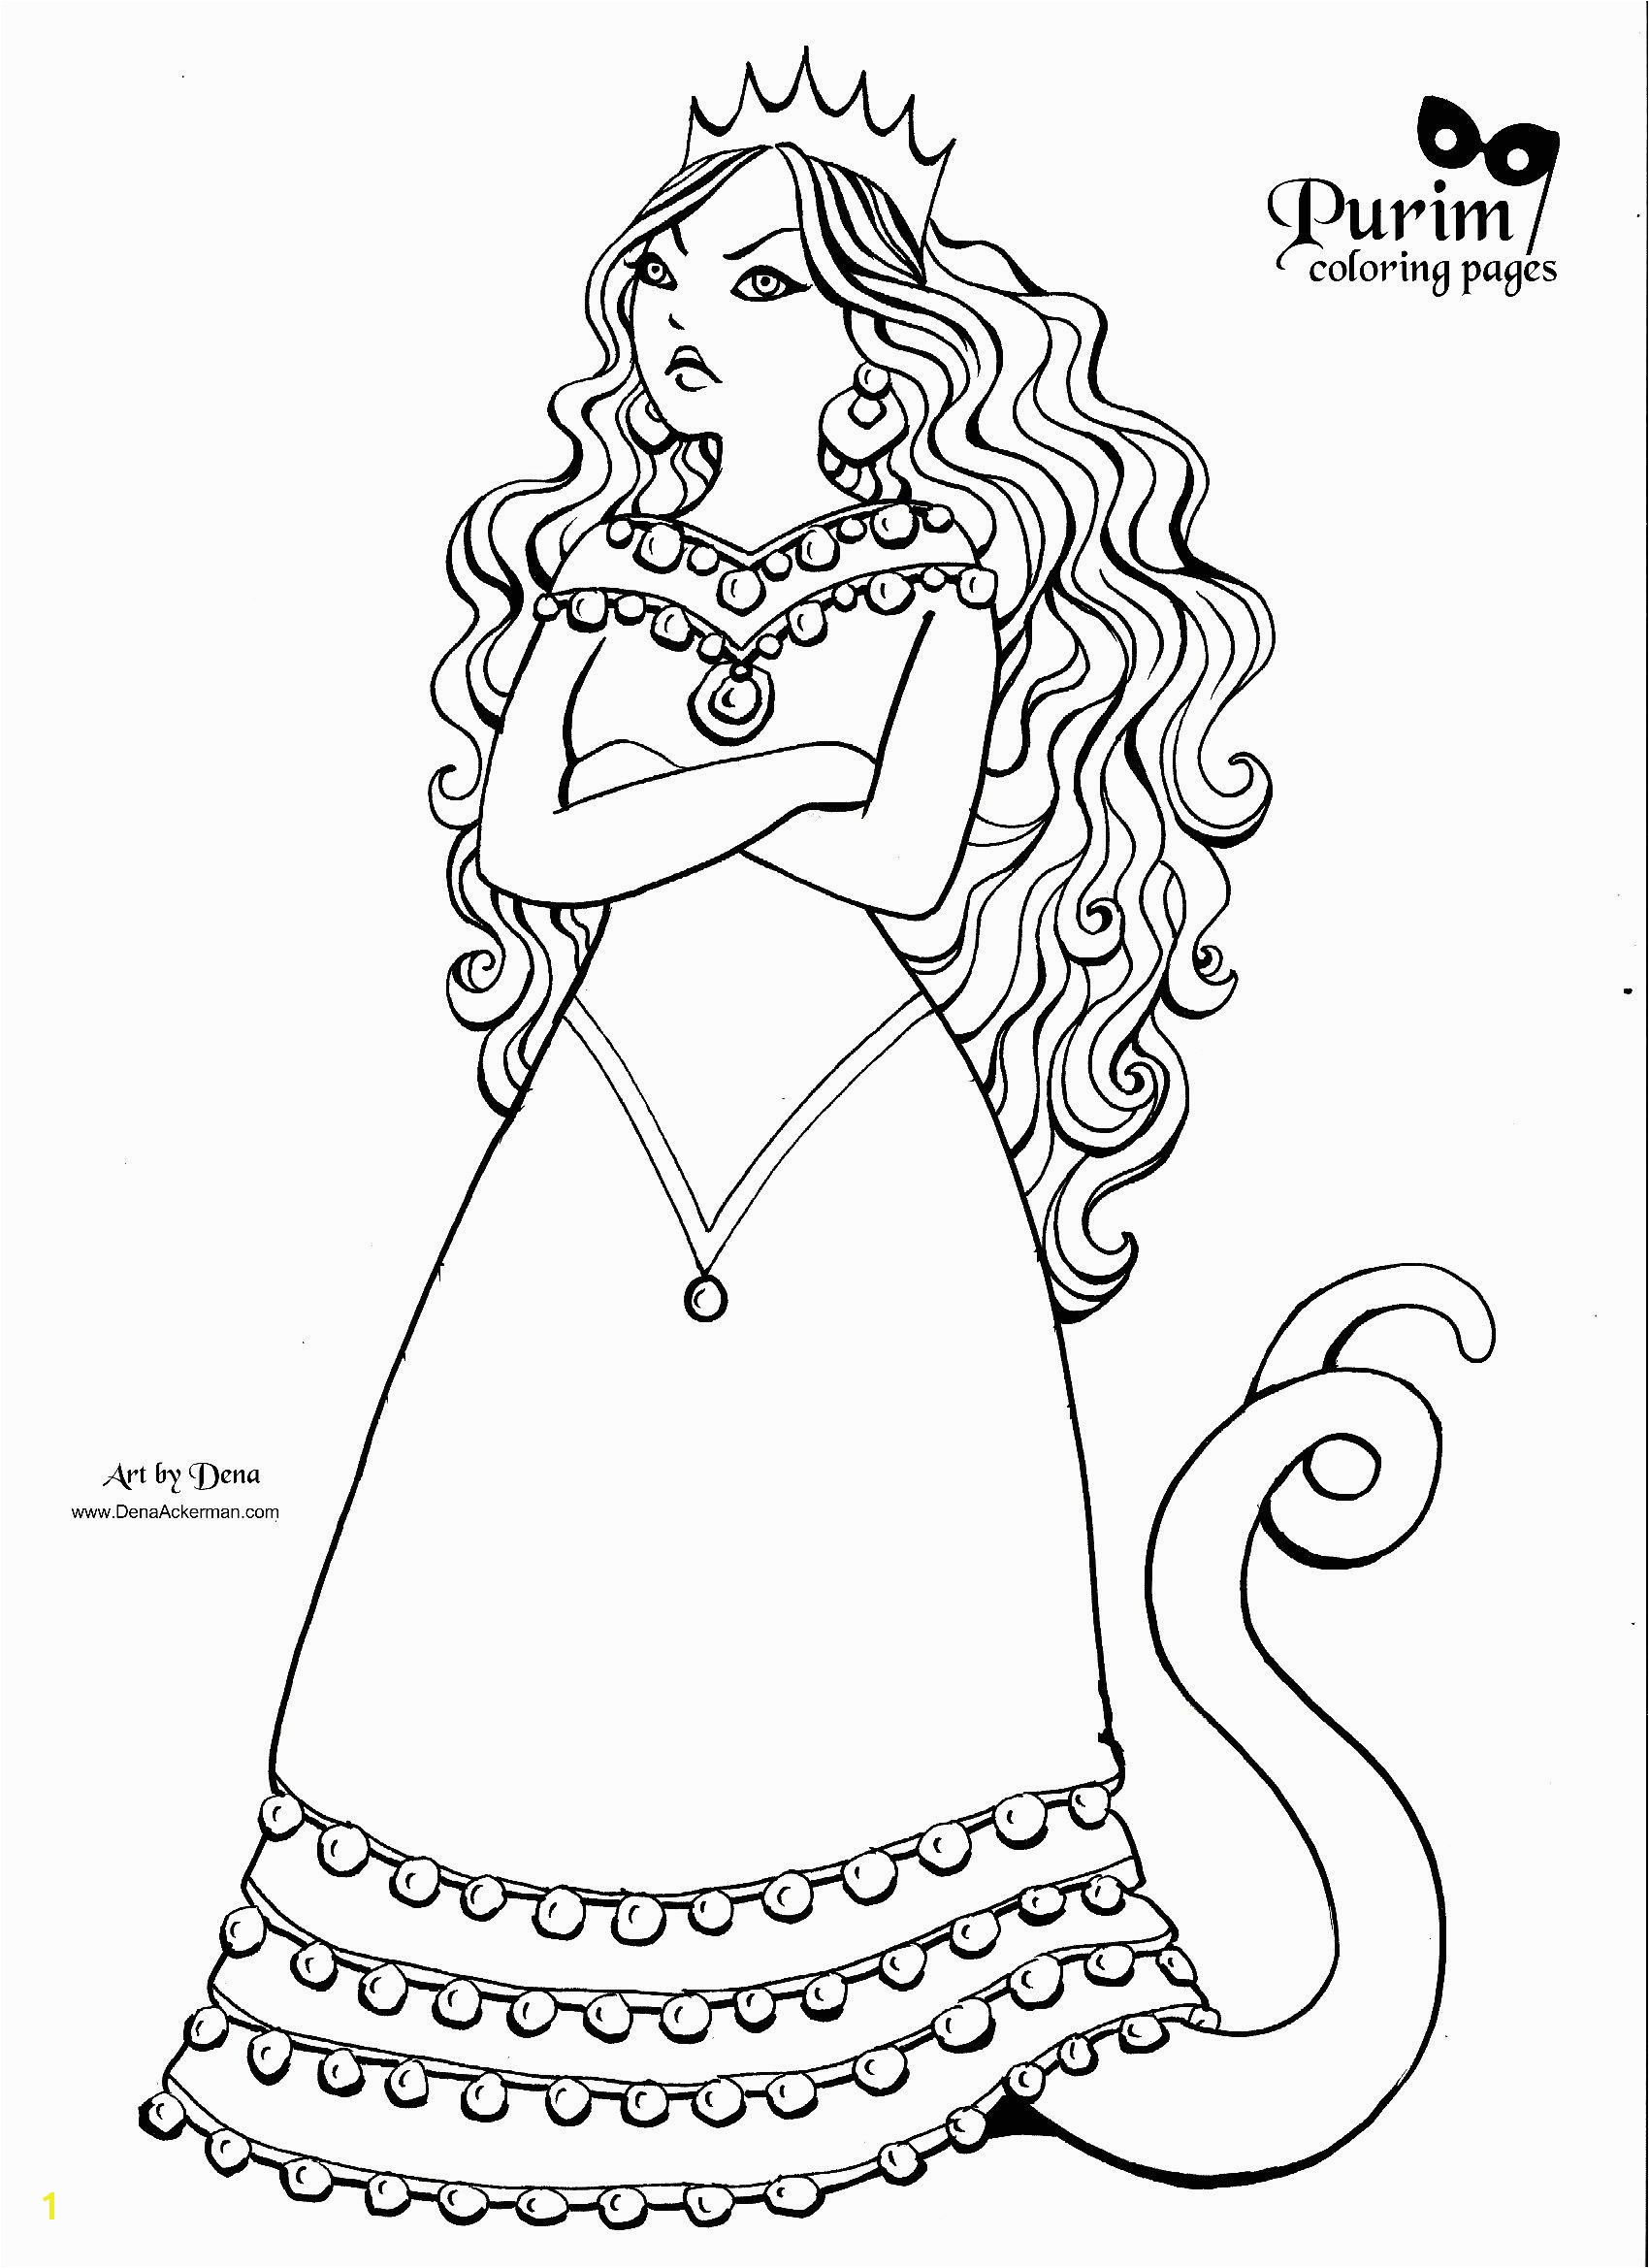 Mordecai and Haman Coloring Pages Purim Coloring Pages Free Coloring Pages Download